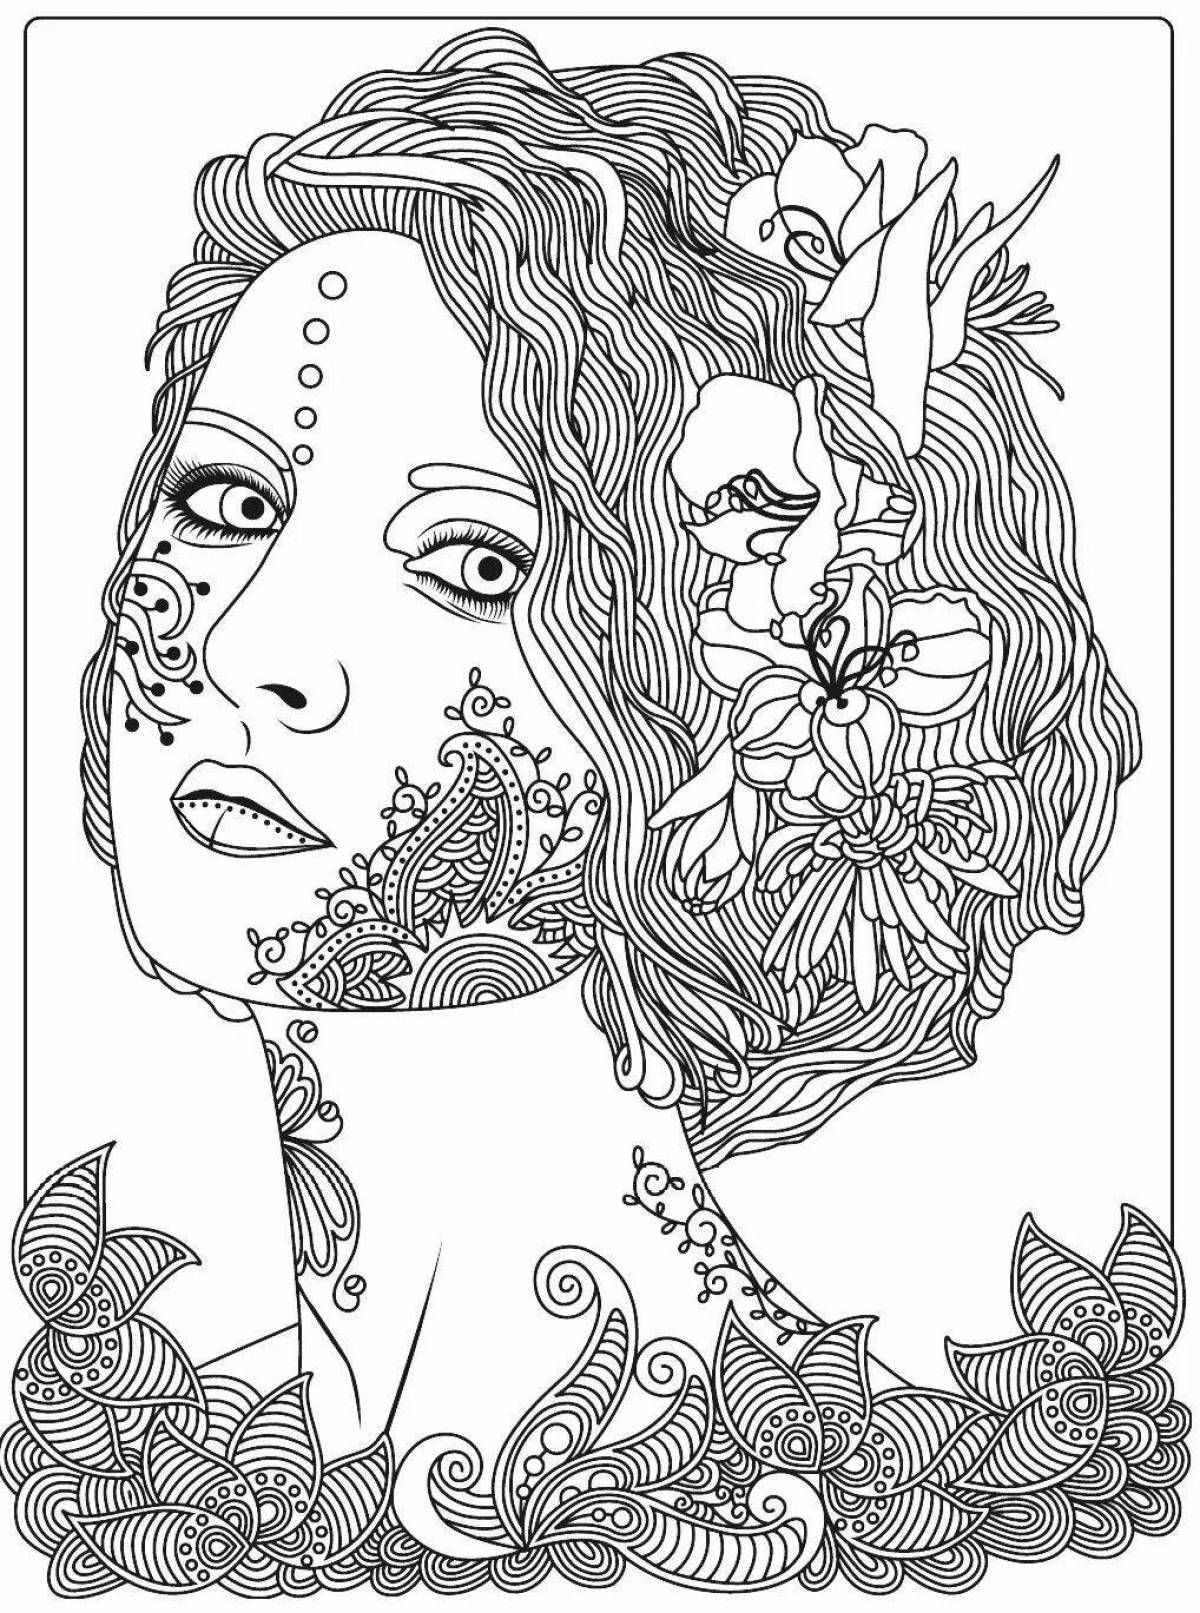 Exquisite anti-stress coloring book for women